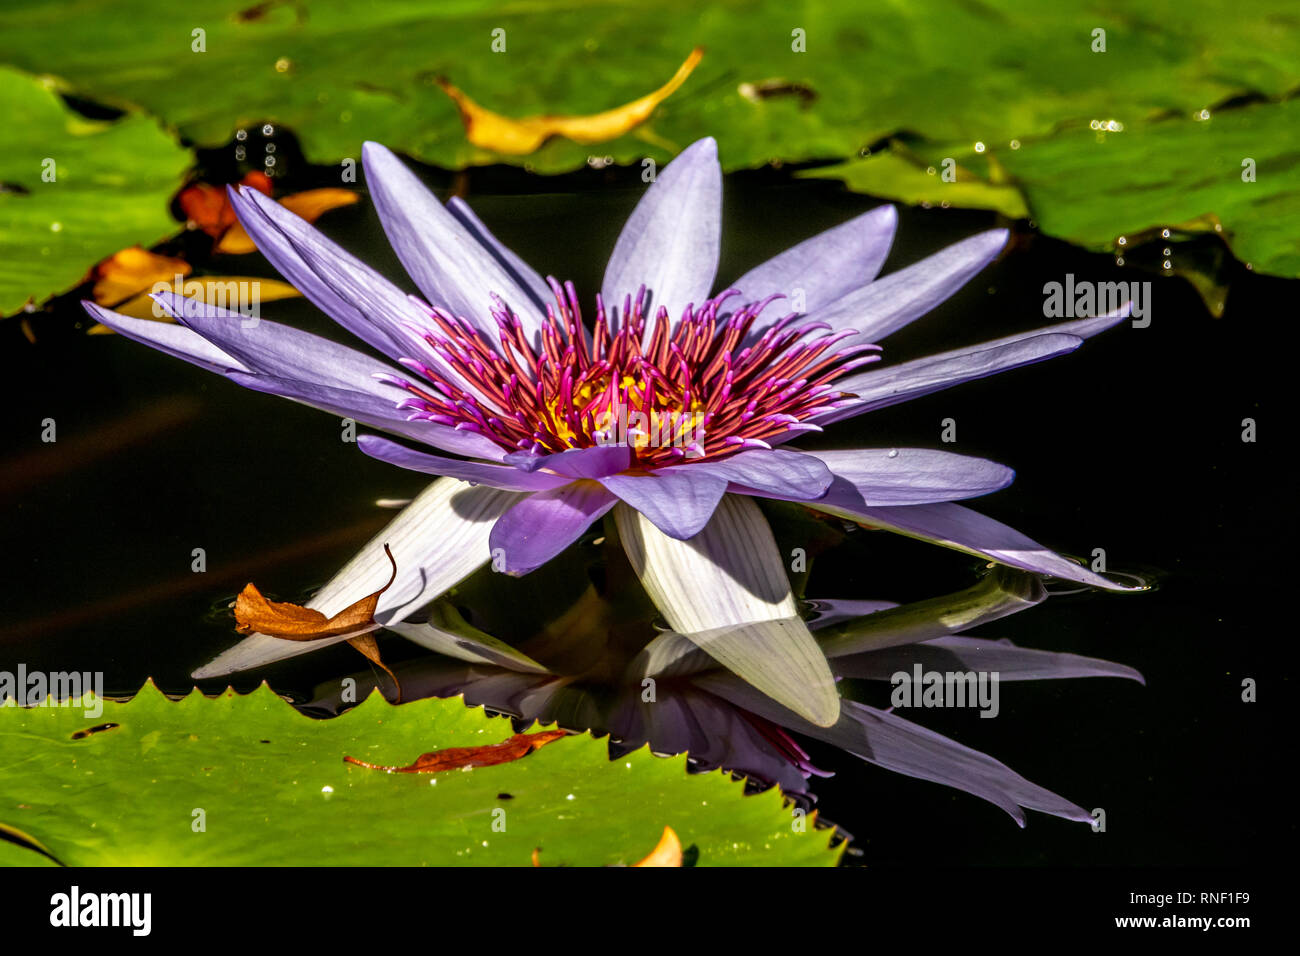 Nymphaeaceae family of flowering plants, commonly called water lilies. Stock Photo